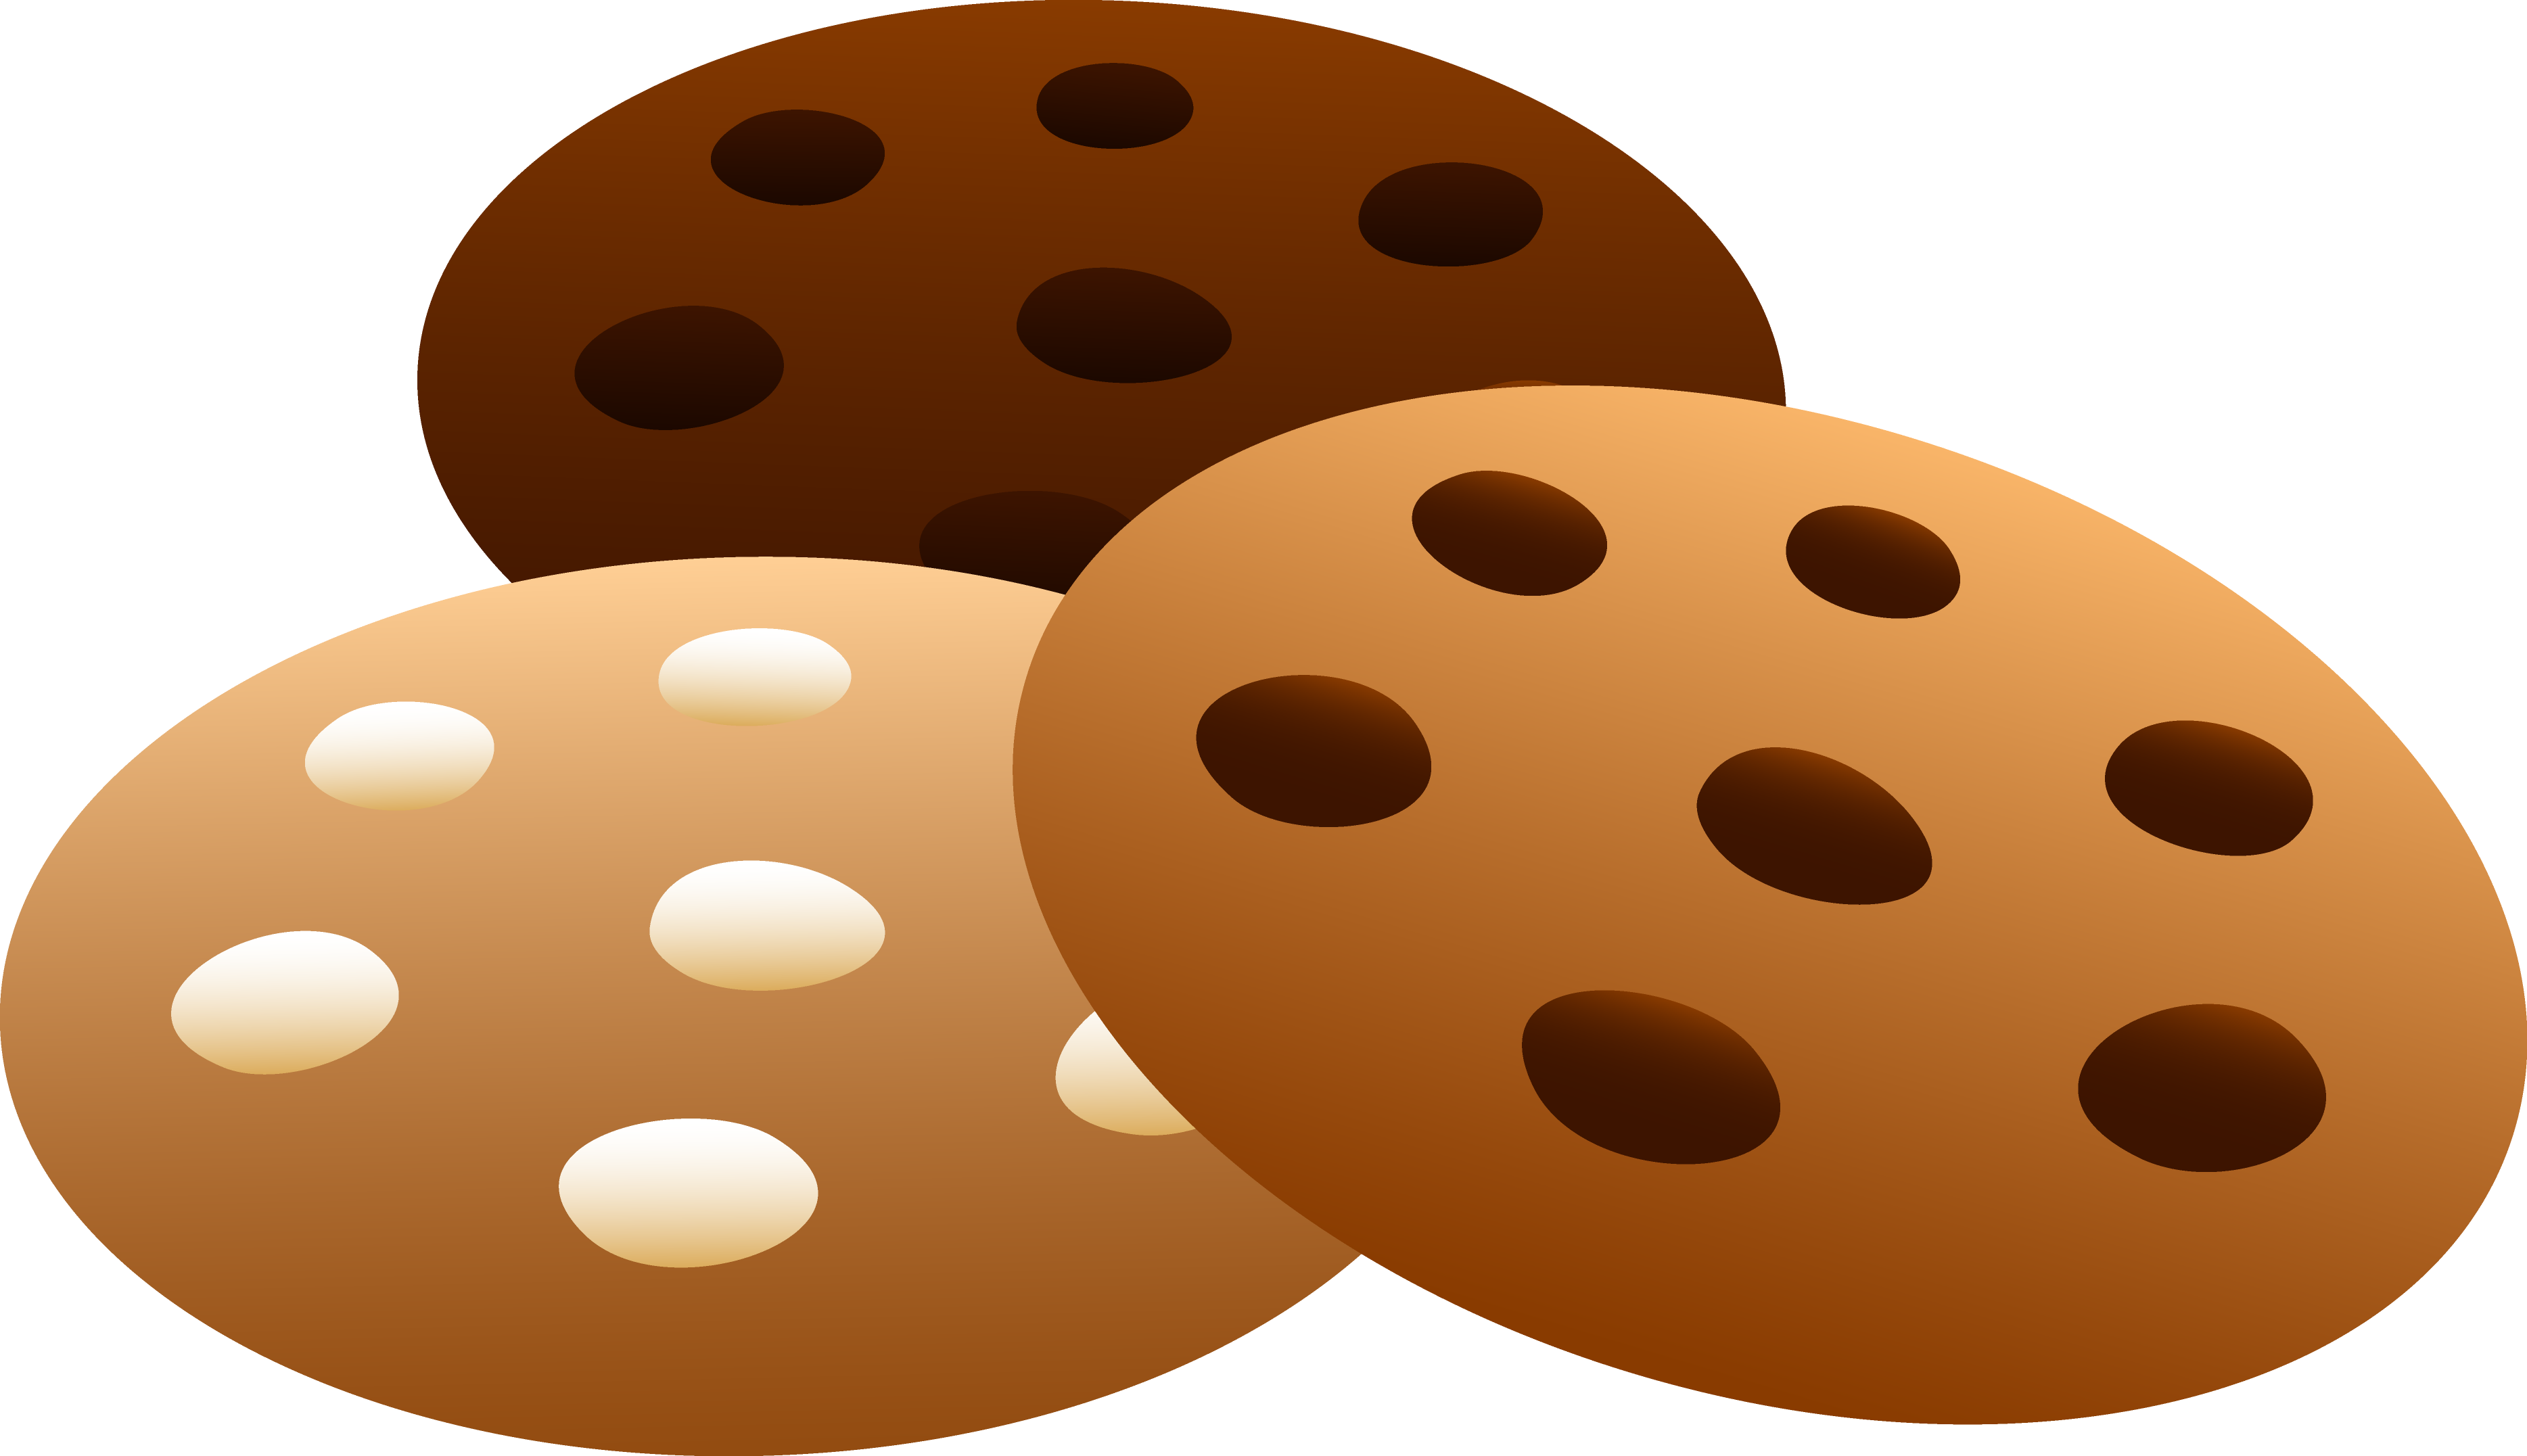 Chocolate Chip Cookie Clipart Black And White.